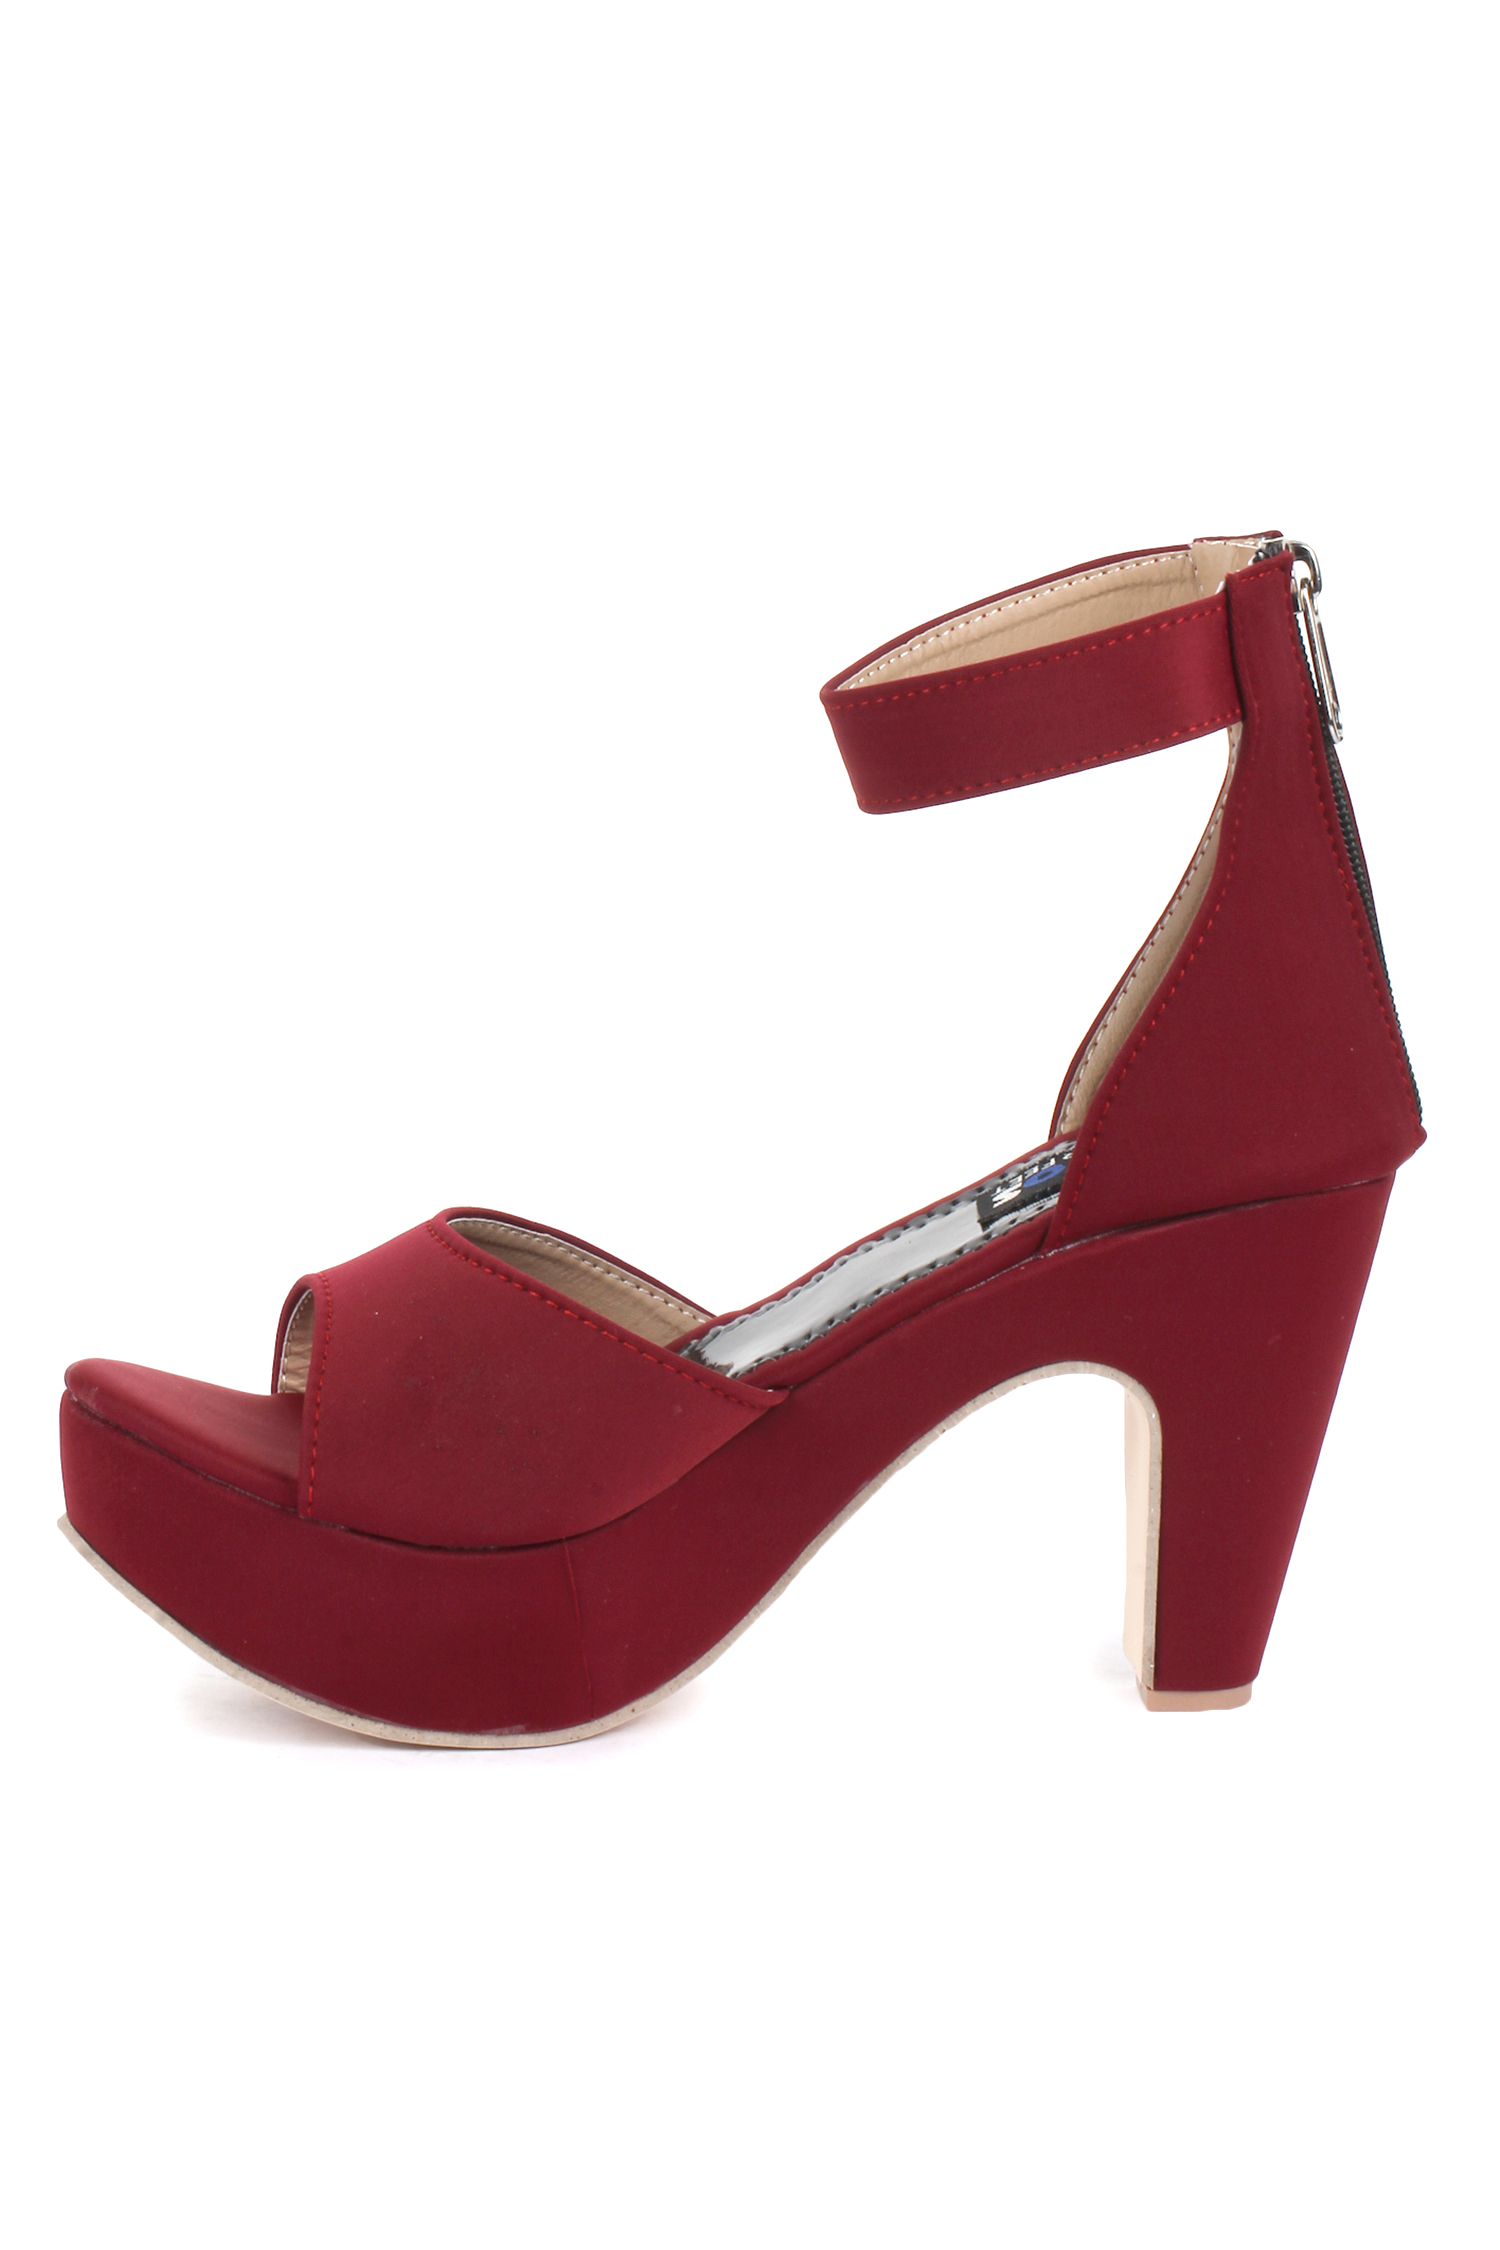 Buy Sapatos Women Maroon Ankle Strap Block Heel Online @ ₹499 from ...